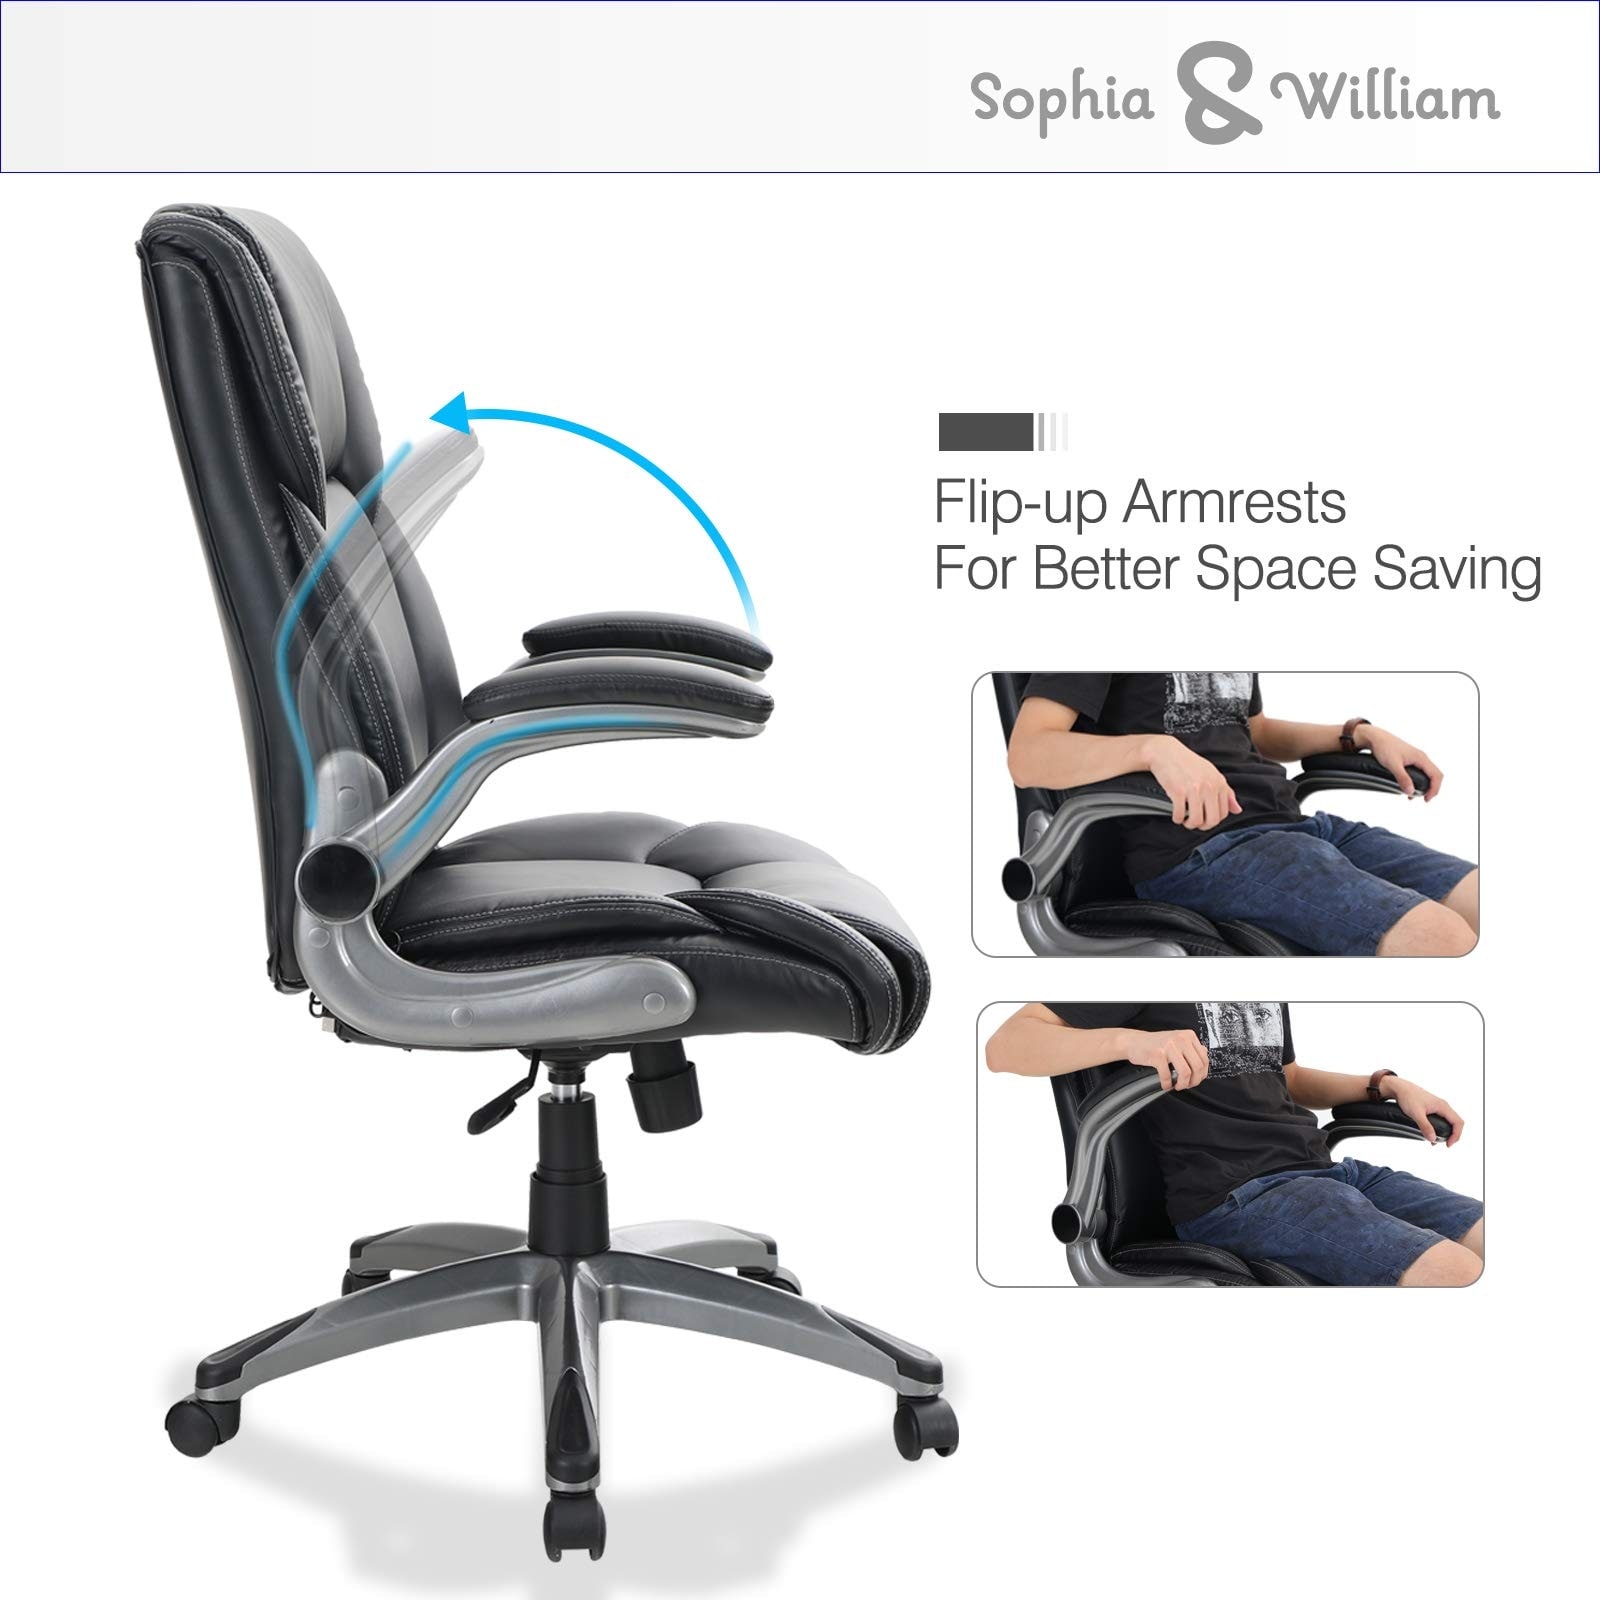 https://ak1.ostkcdn.com/images/products/is/images/direct/bb7580c32f96438b16f1410d2d7e5642501068b4/Sophia-%26-William-Leather-Ergonomic-Office-Desk-Chair-360%C2%B0-Swivel%2C-High-Back-Executive-Computer-Chair-with-Flip-up-Armrests.jpg